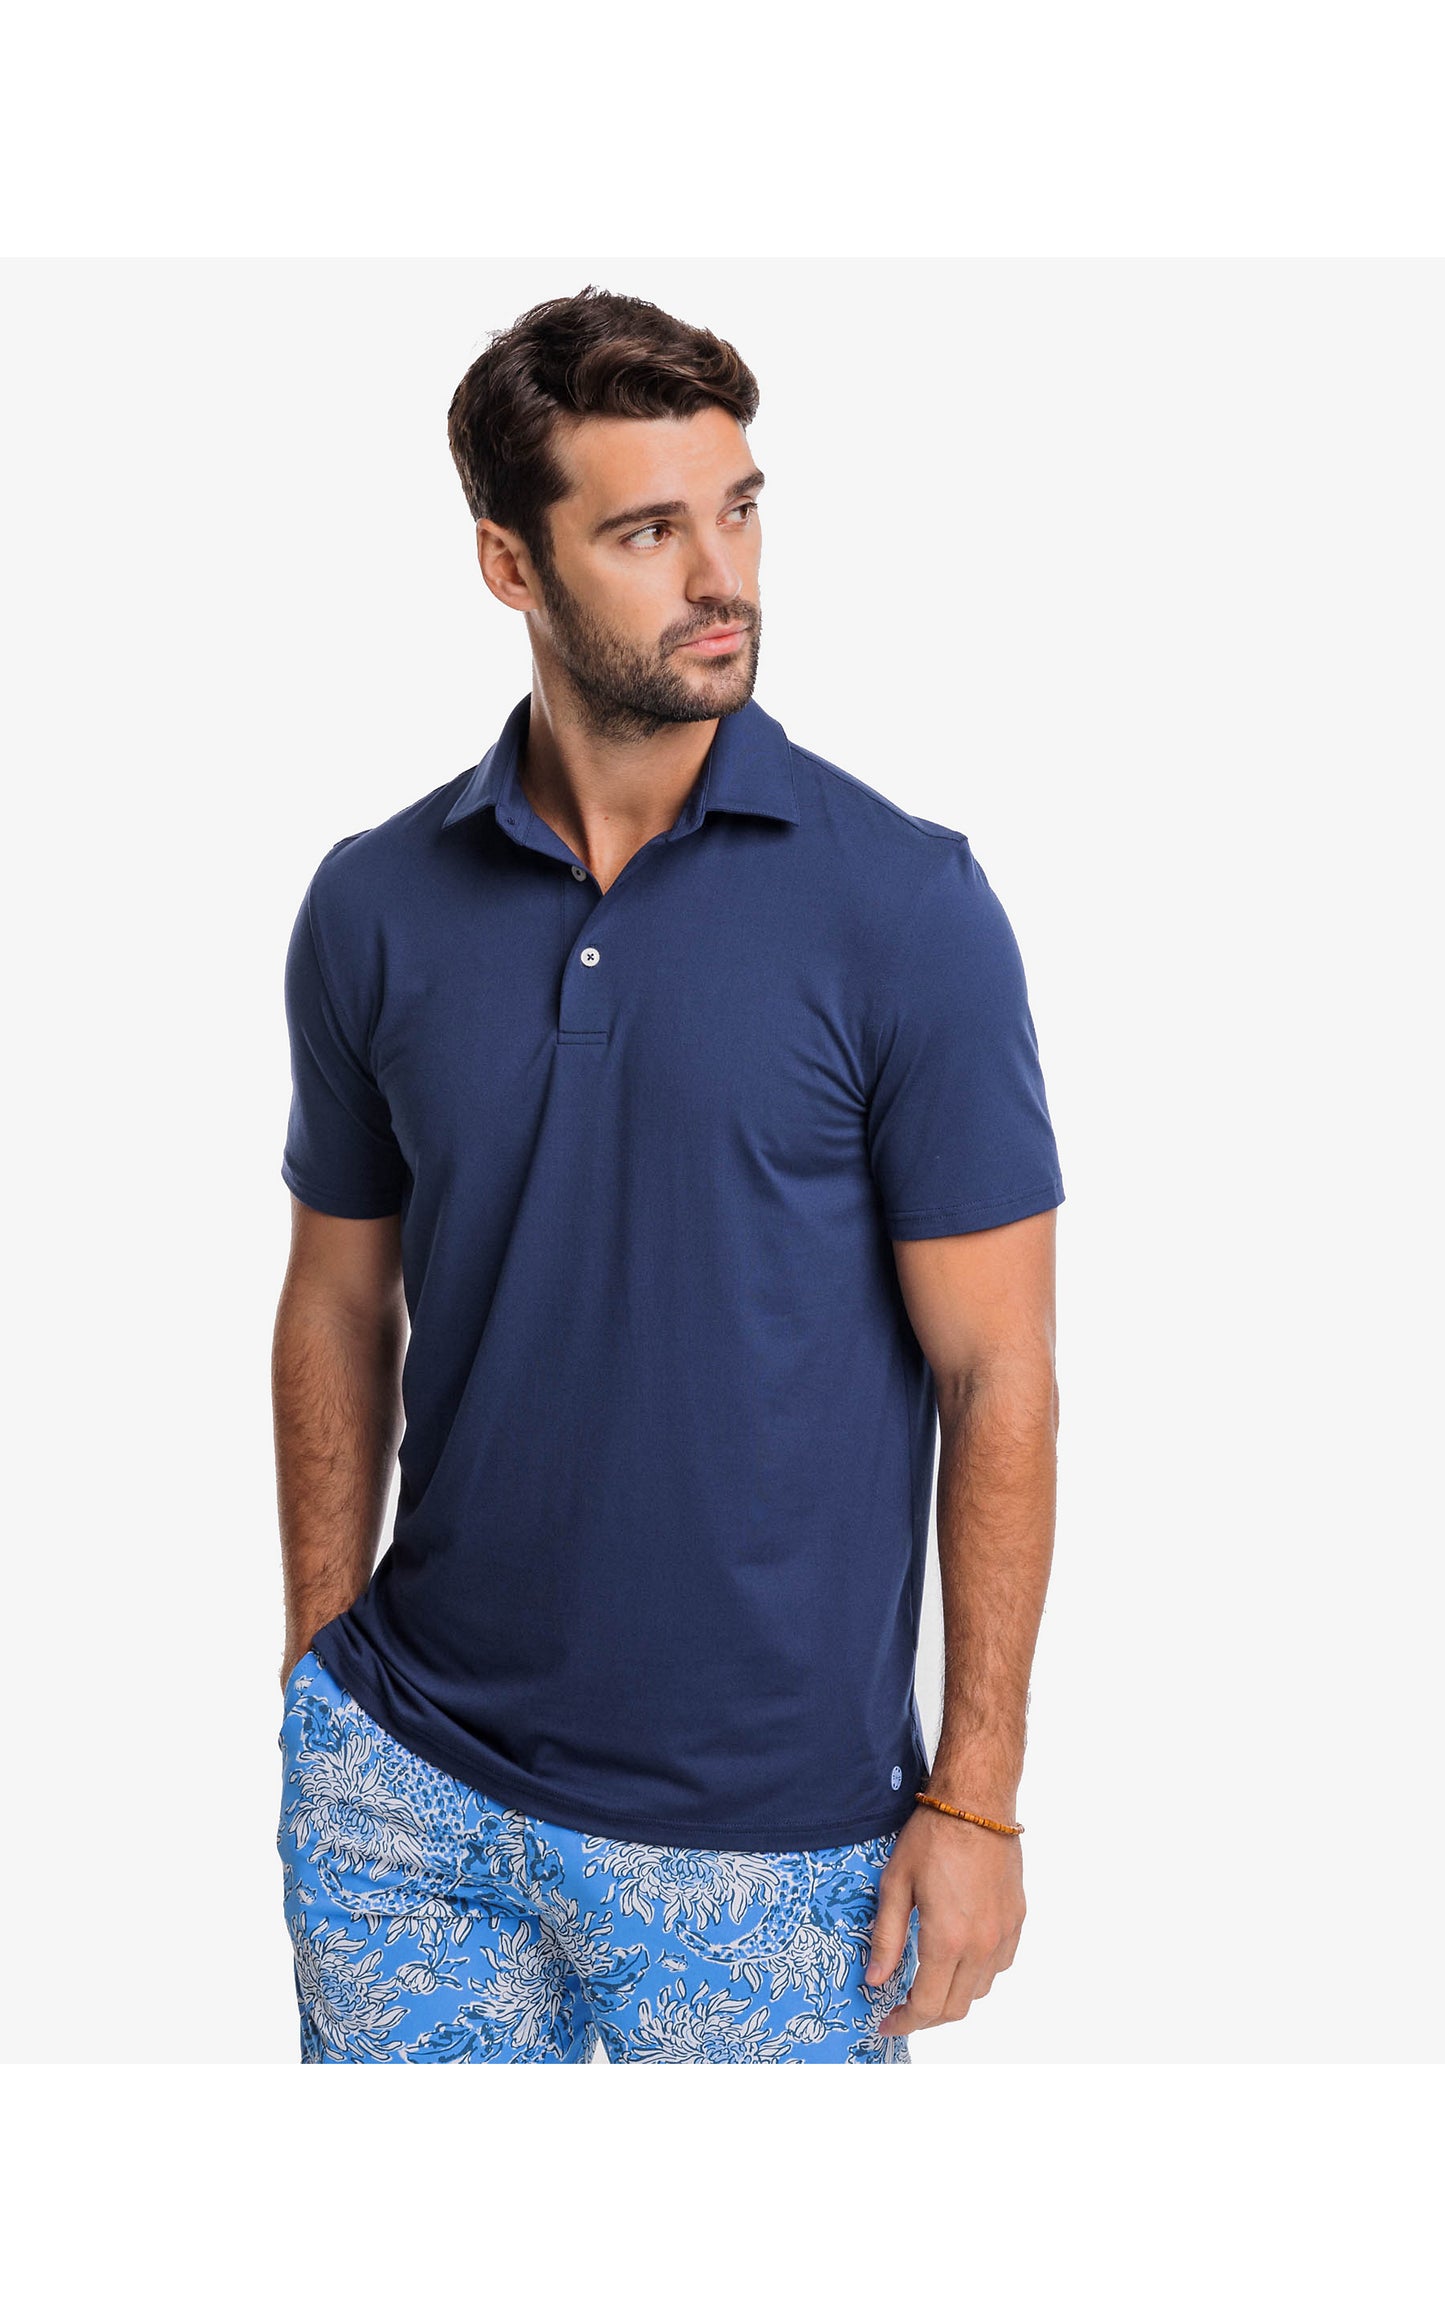 Lilly Pulitzer x Southern Tide: Men's Southern Tide Ryder Polo In True Navy